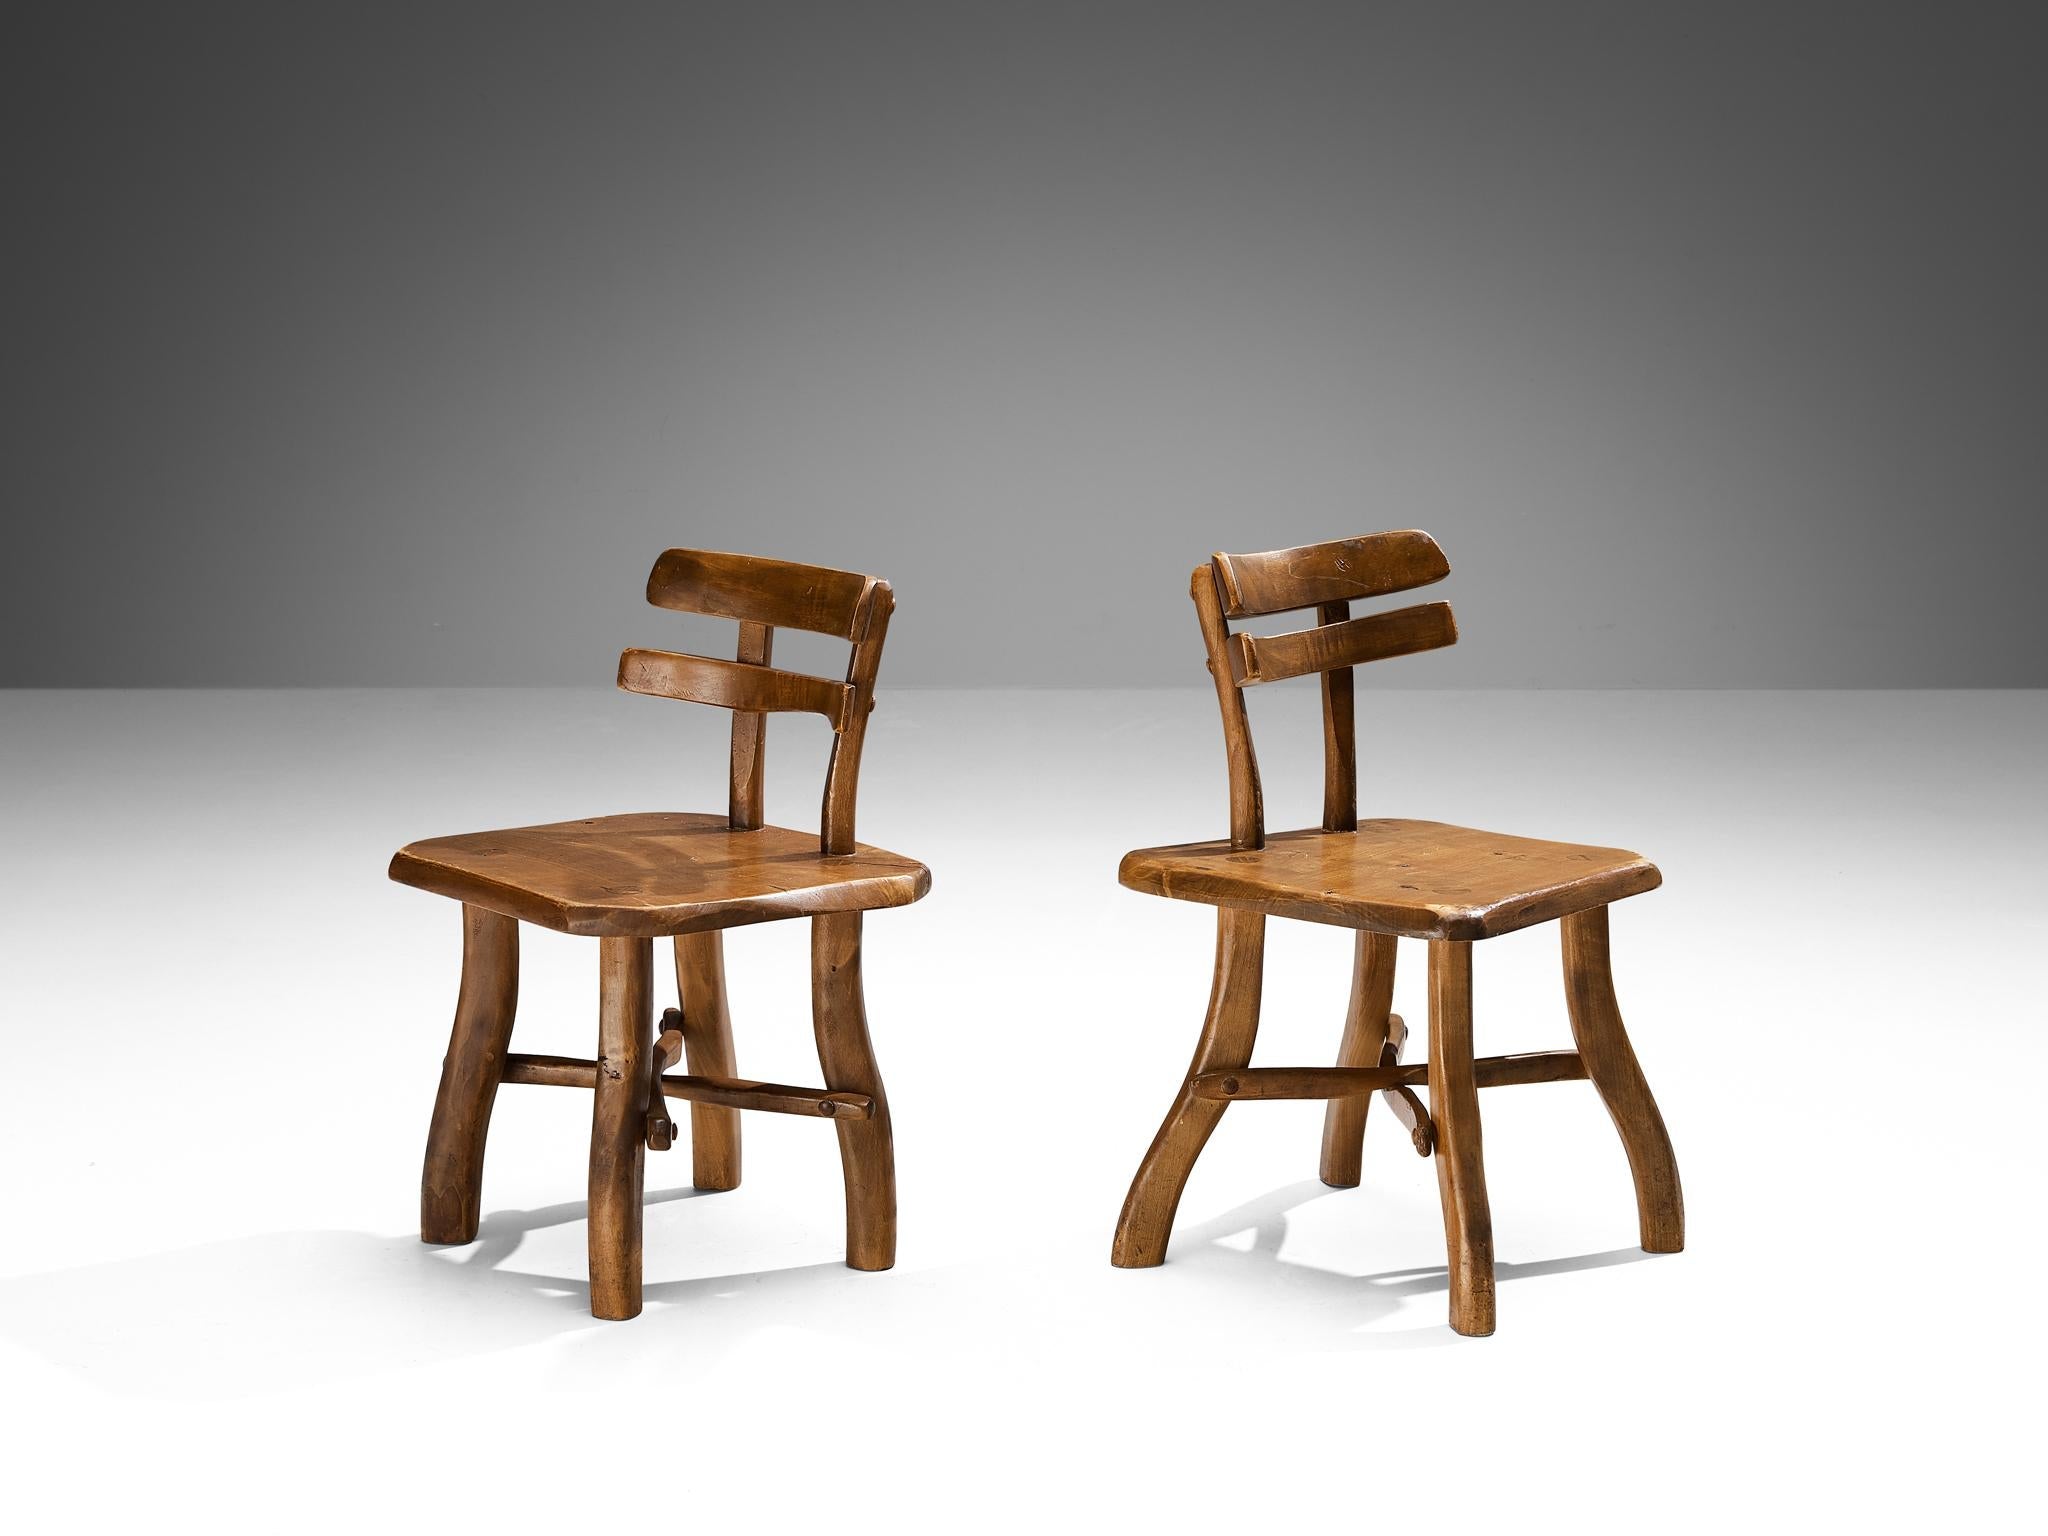 Organic Brutalist Chairs with Decorative Double Backrests in Maple